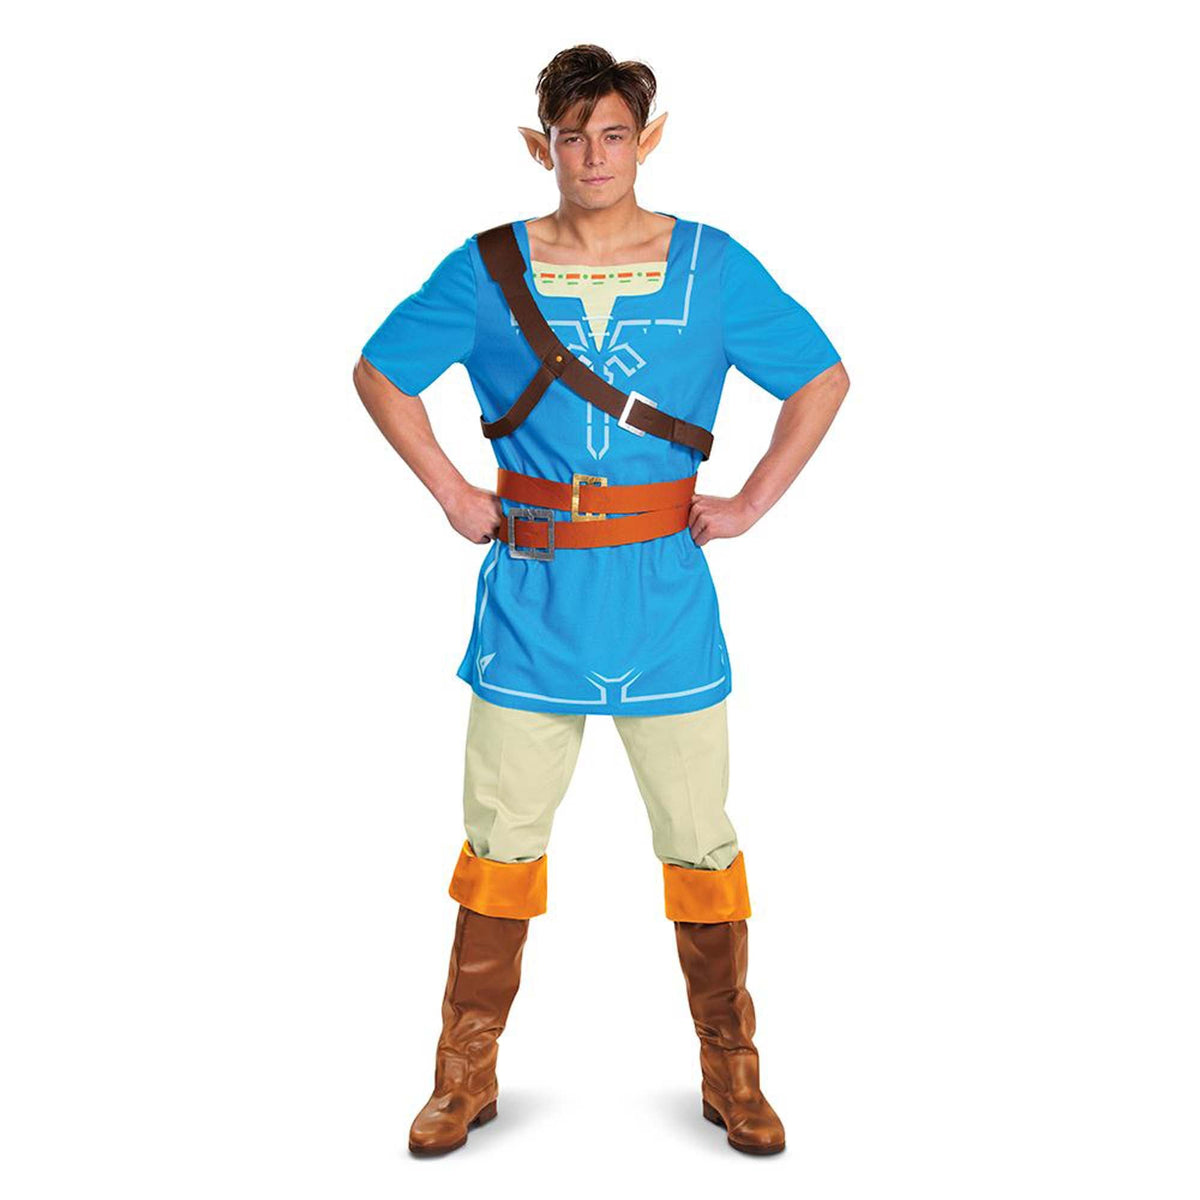 DISGUISE (TOY-SPORT) Costumes Nintendo Zelda: Breath of the World Link Costume for Adults, Blue Tunic with Attached Chest Belt